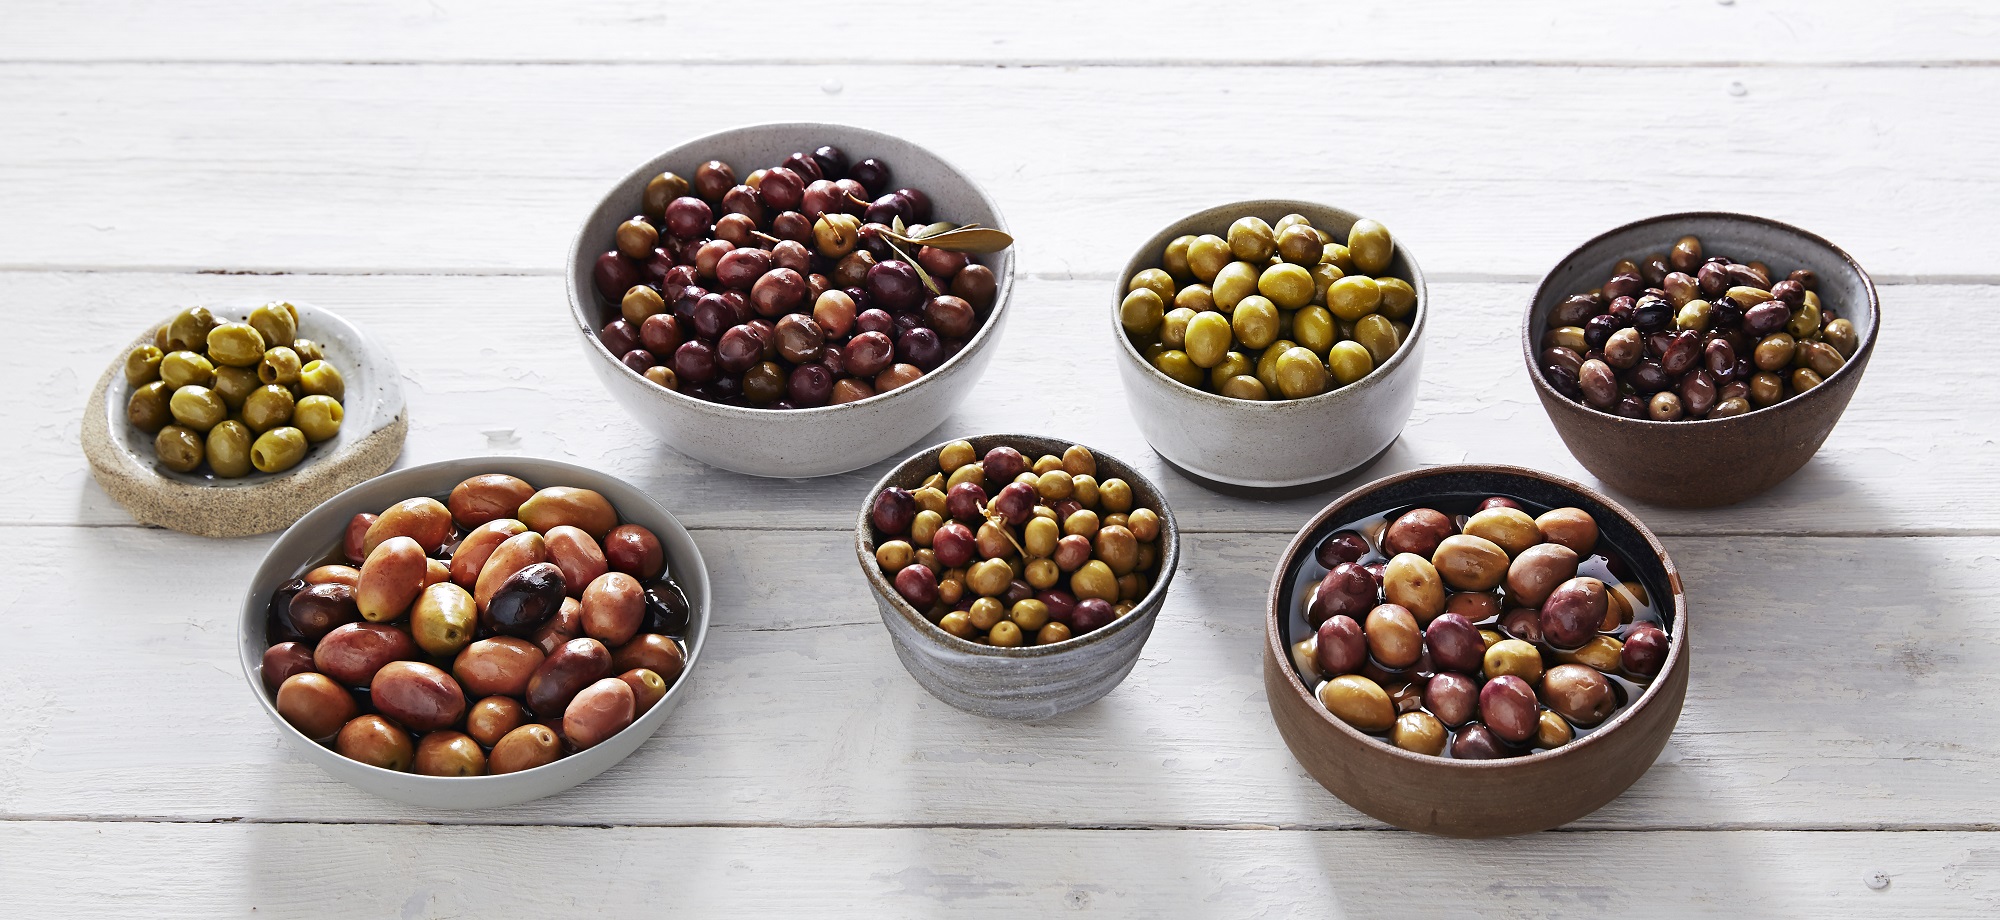 All About the Olive | Mount Zero Olives